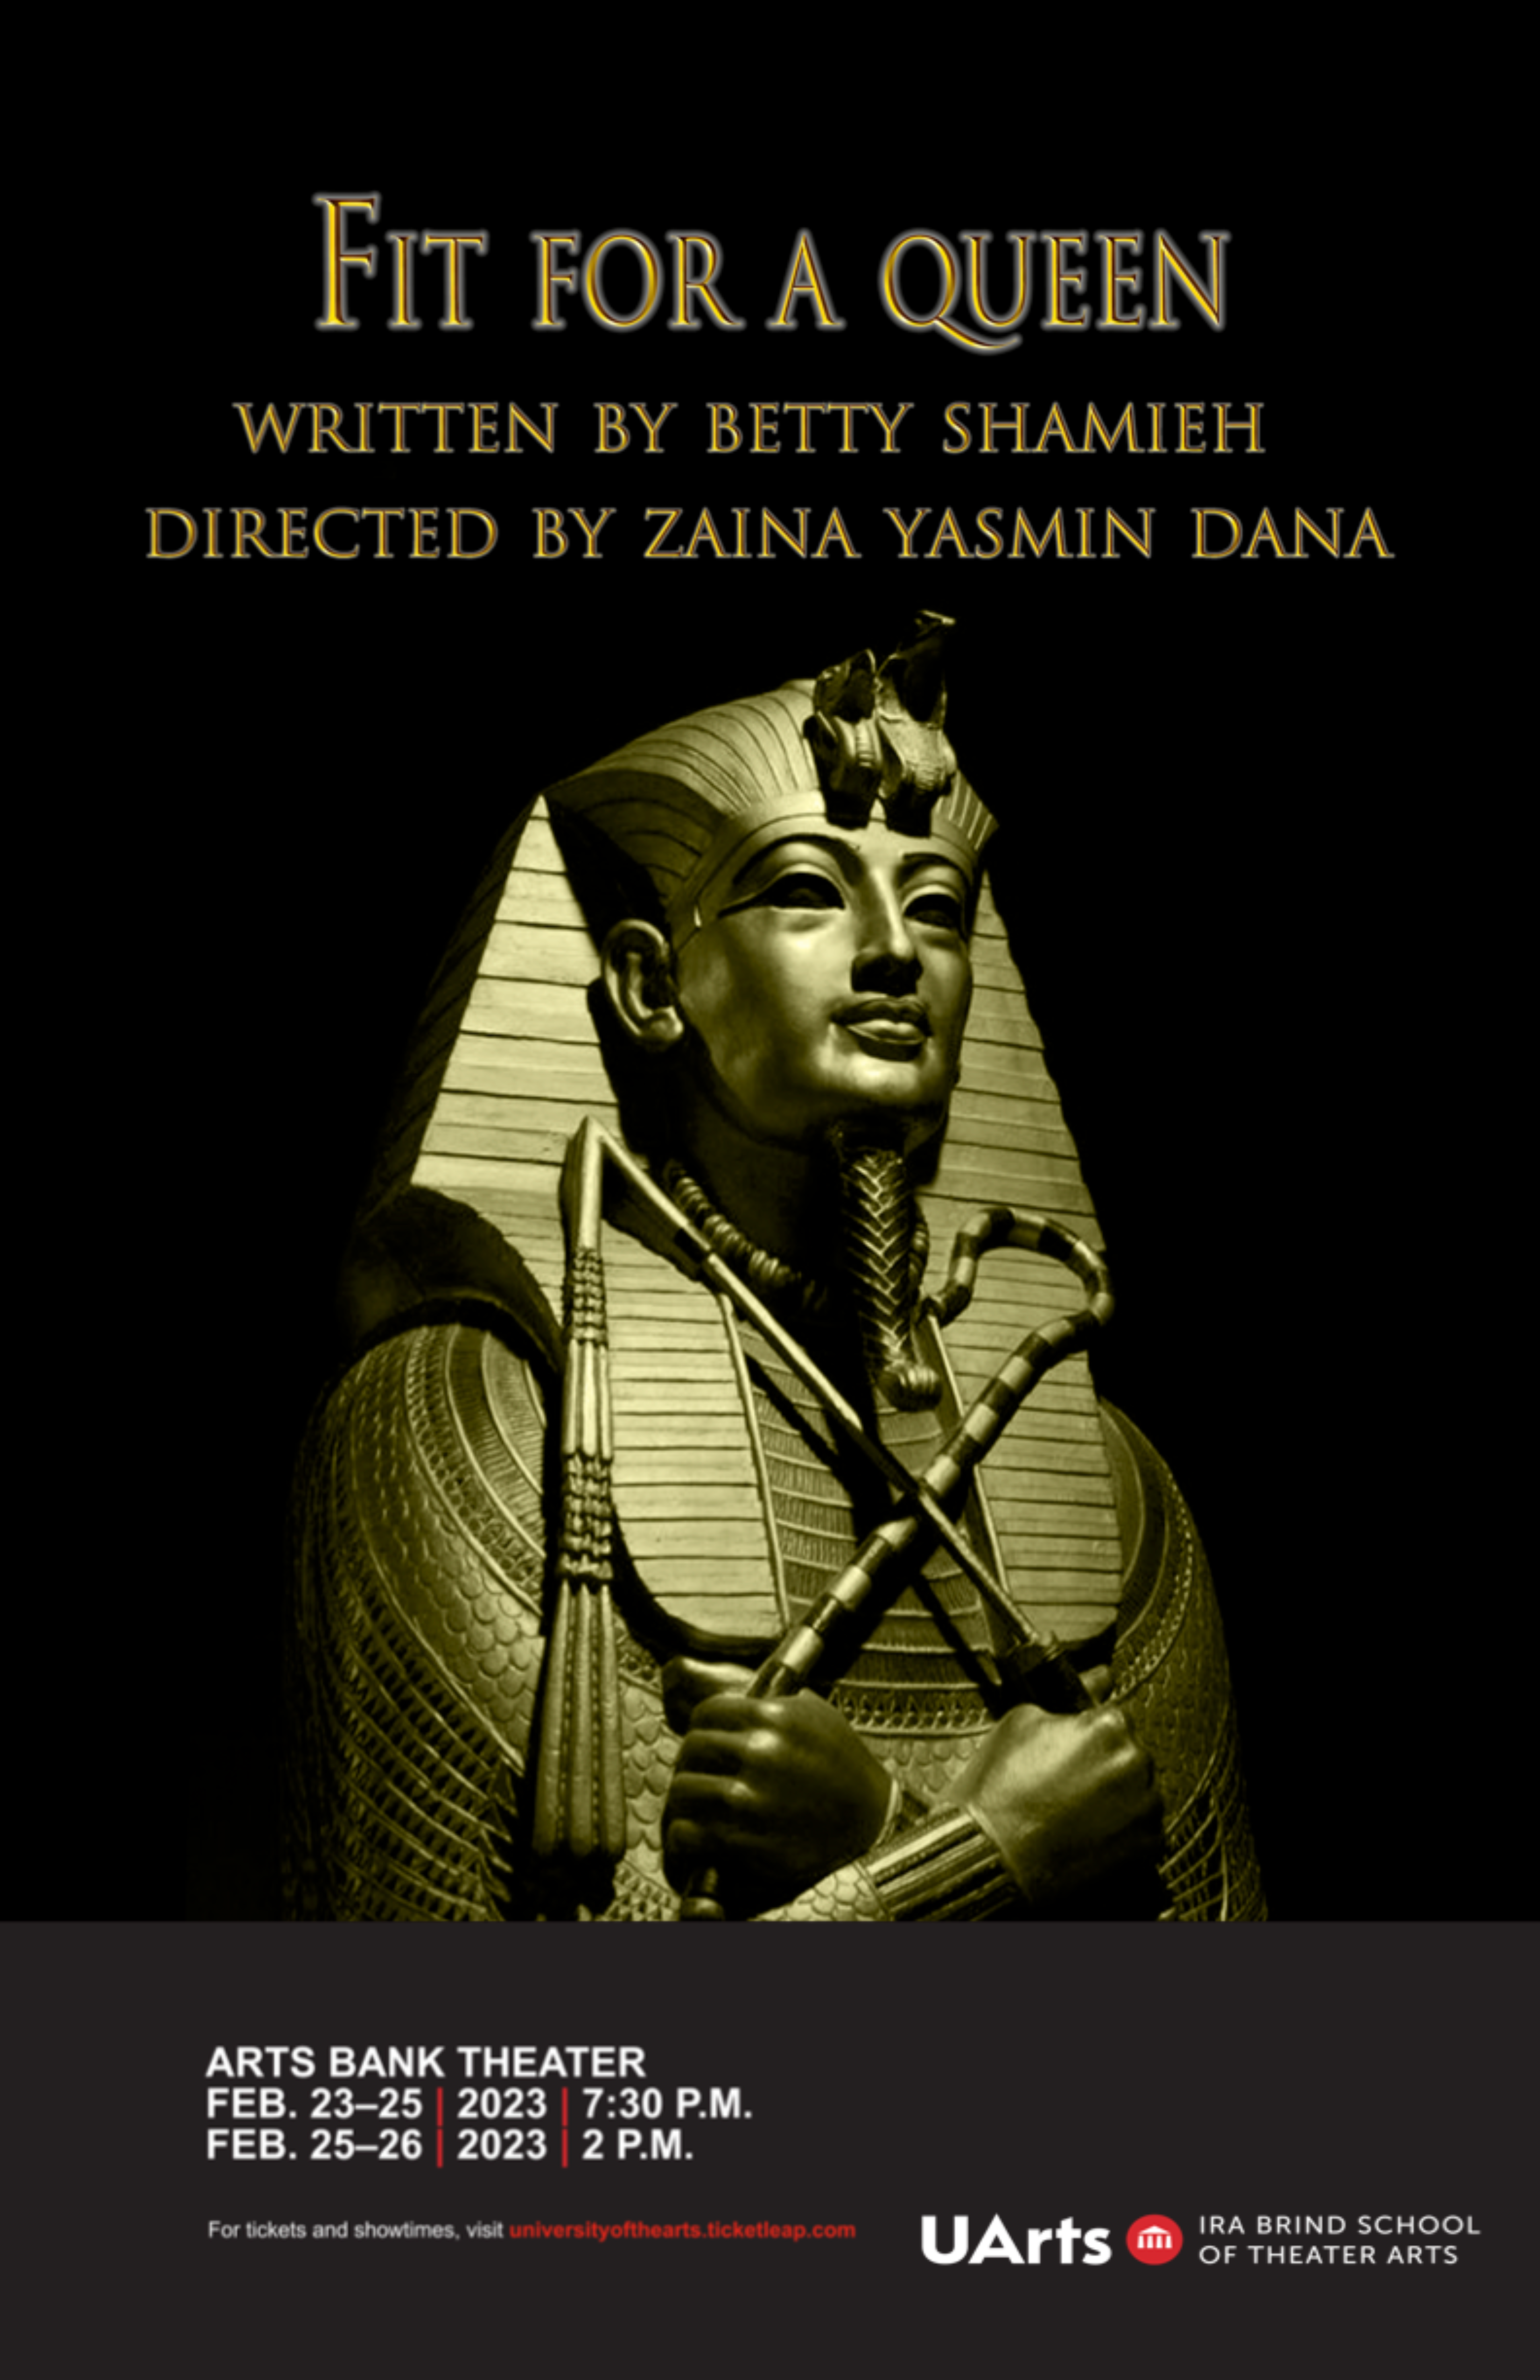 Black background with golden sarcophagus in the forefront. The image reads “Fit for a Queen Written by Bettey Shamieh, Directed by Zaina Yasmin Dana”. The bottom reads “ Arts Bank Theater Feb. 23–25, 2023 at 7:30 P.M.” and “Feb. 25–26, 2023 at 2 P.M.”.  